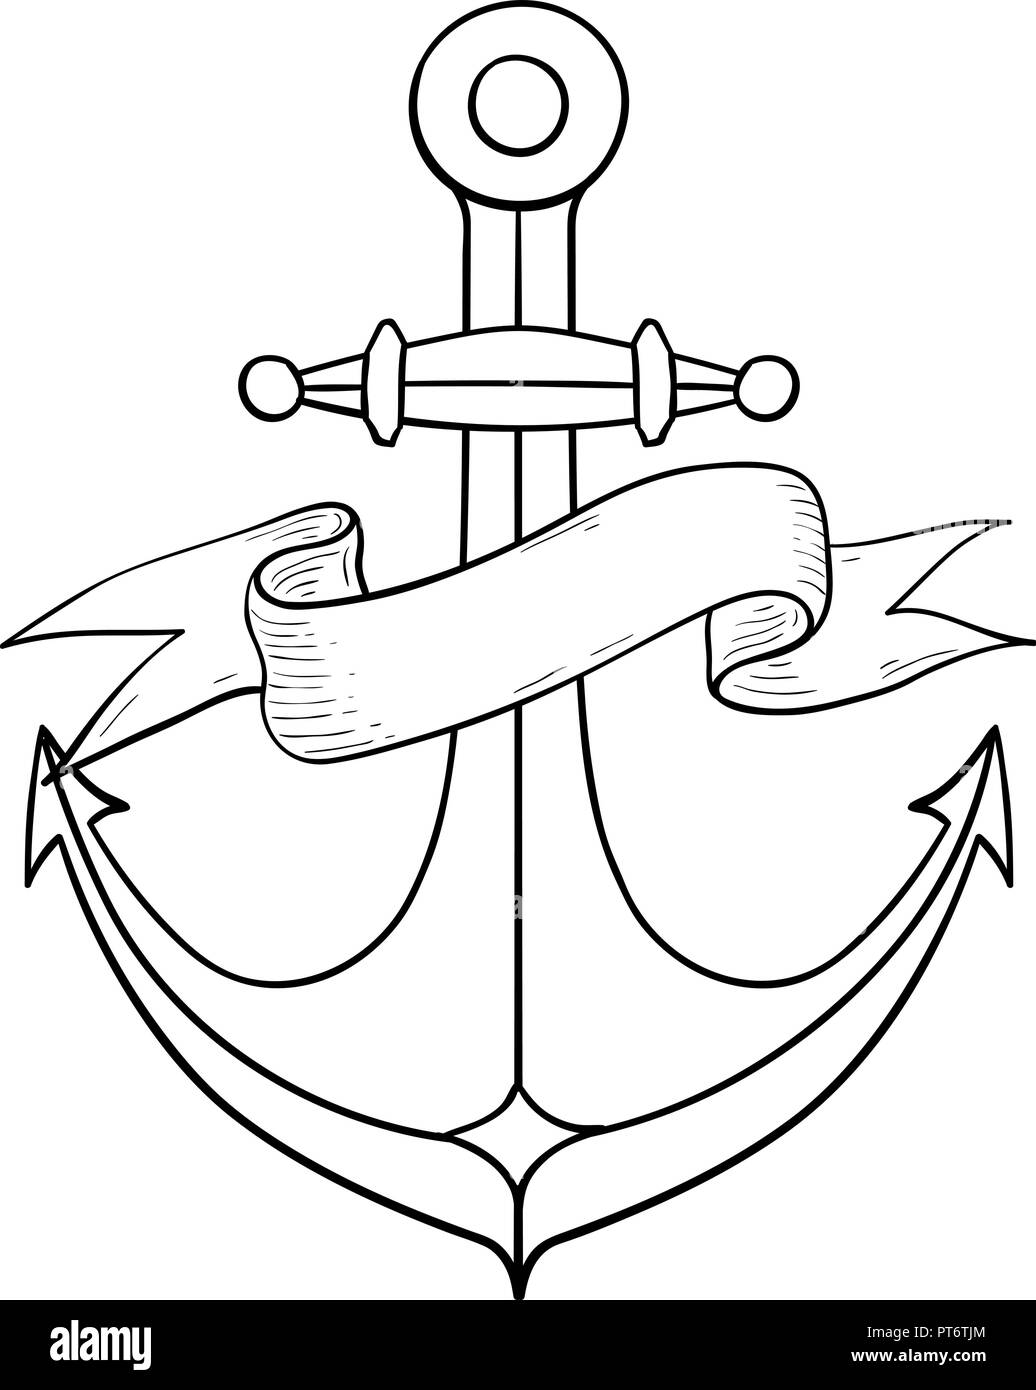 Anchor. Outline drawing, hand drawn sketch Stock Vector Image